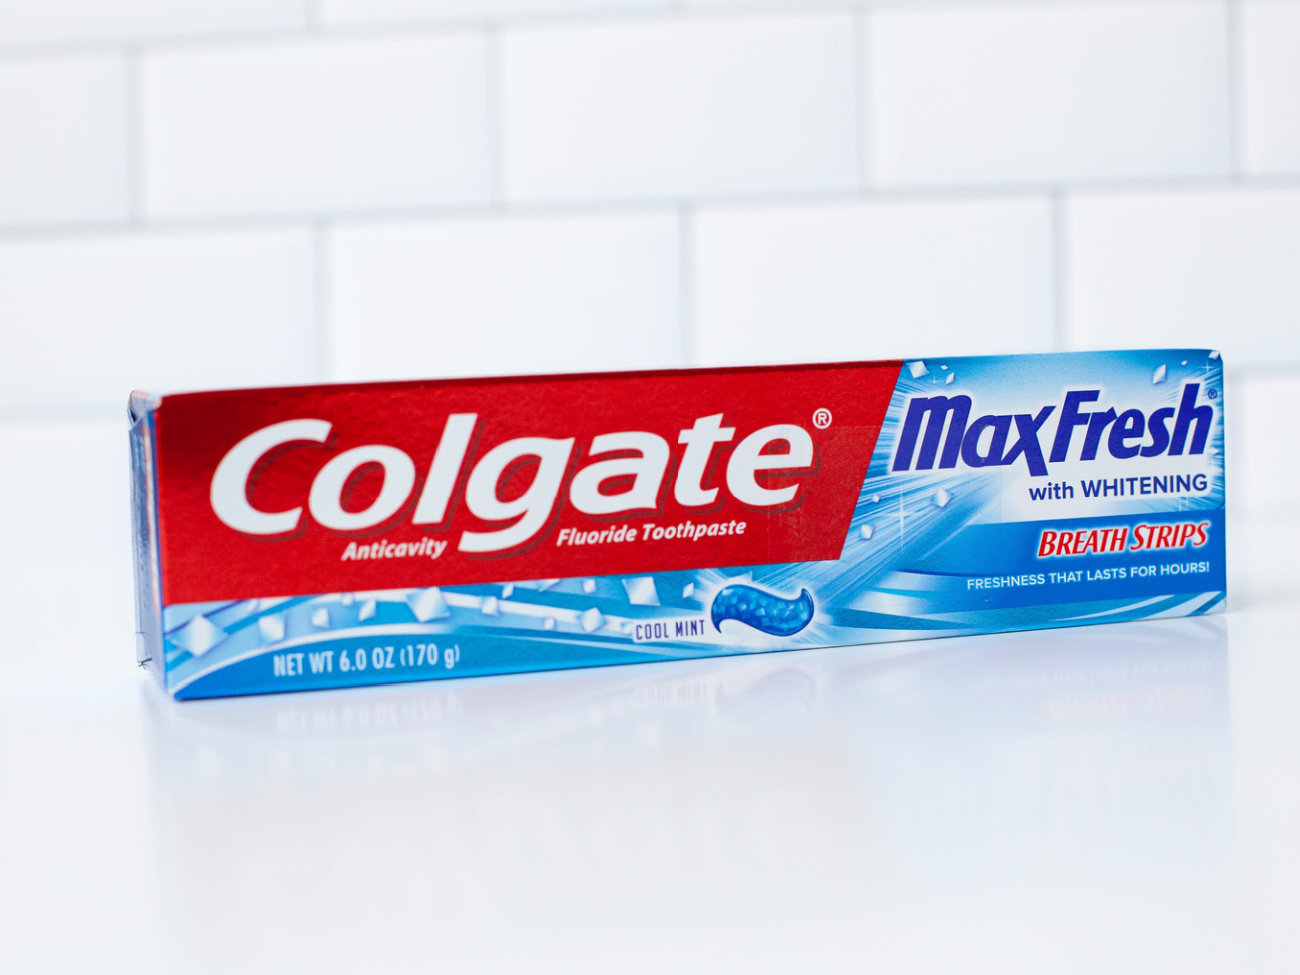 Colgate Toothpaste As Low As 85¢ At Publix on I Heart Publix